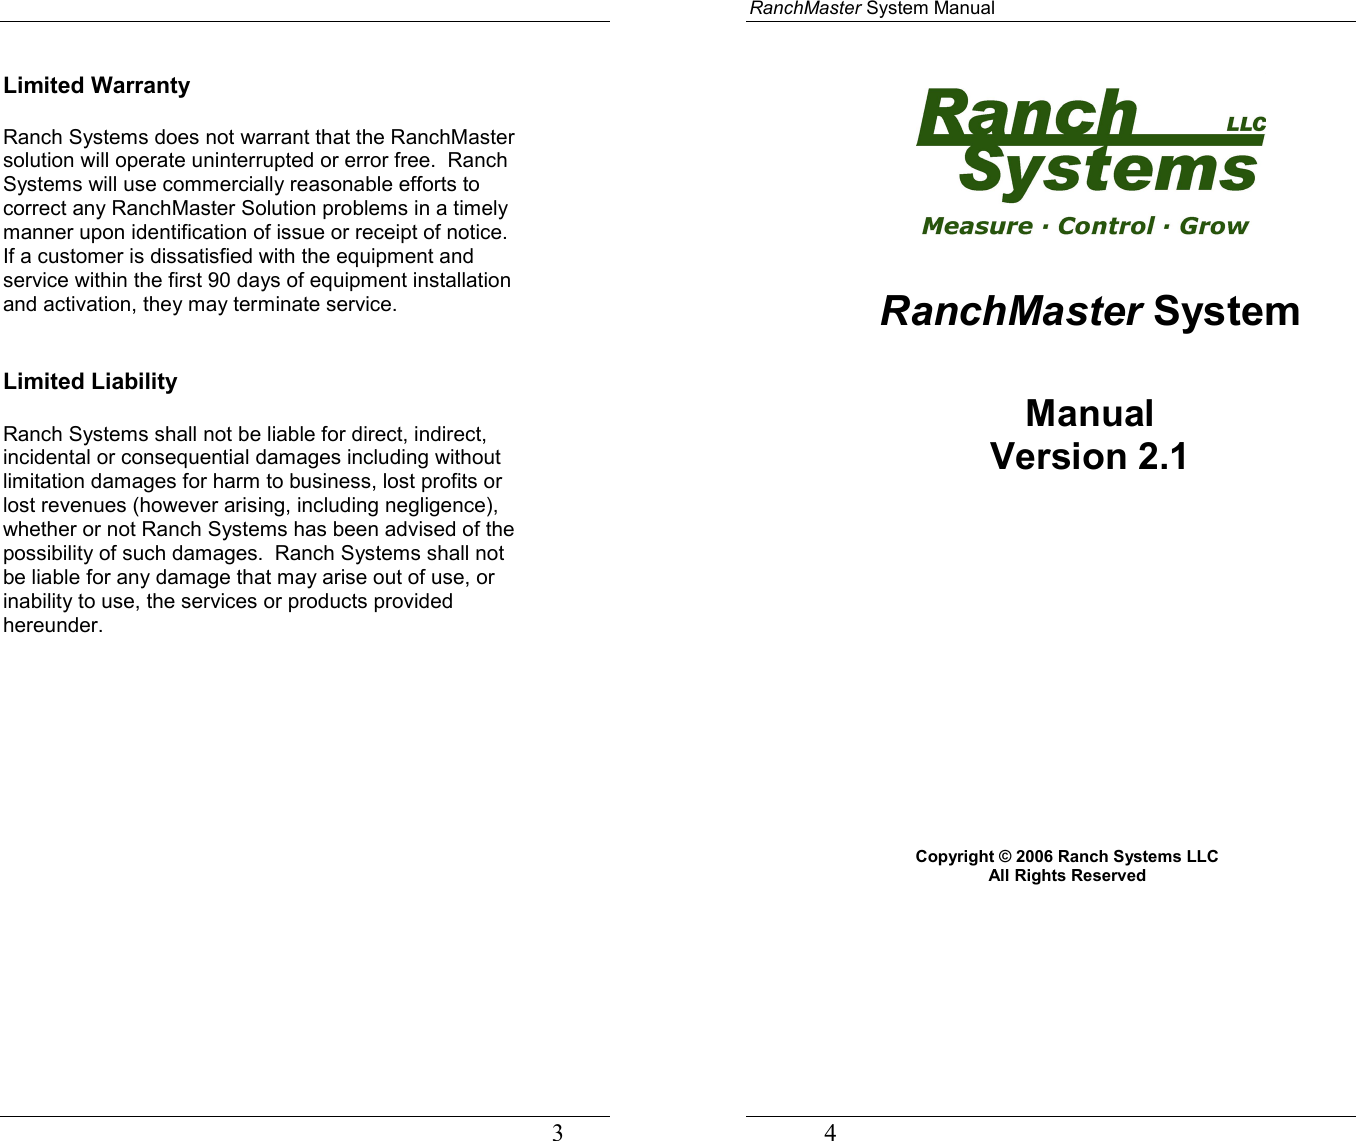                                                                                   3 Limited Warranty  Ranch Systems does not warrant that the RanchMaster solution will operate uninterrupted or error free.  Ranch Systems will use commercially reasonable efforts to correct any RanchMaster Solution problems in a timely manner upon identification of issue or receipt of notice.  If a customer is dissatisfied with the equipment and service within the first 90 days of equipment installation and activation, they may terminate service.   Limited Liability  Ranch Systems shall not be liable for direct, indirect, incidental or consequential damages including without limitation damages for harm to business, lost profits or lost revenues (however arising, including negligence), whether or not Ranch Systems has been advised of the possibility of such damages.  Ranch Systems shall not be liable for any damage that may arise out of use, or inability to use, the services or products provided hereunder.             RanchMaster System Manual             4   RanchMaster System  Manual Version 2.1               Copyright © 2006 Ranch Systems LLC  All Rights Reserved  